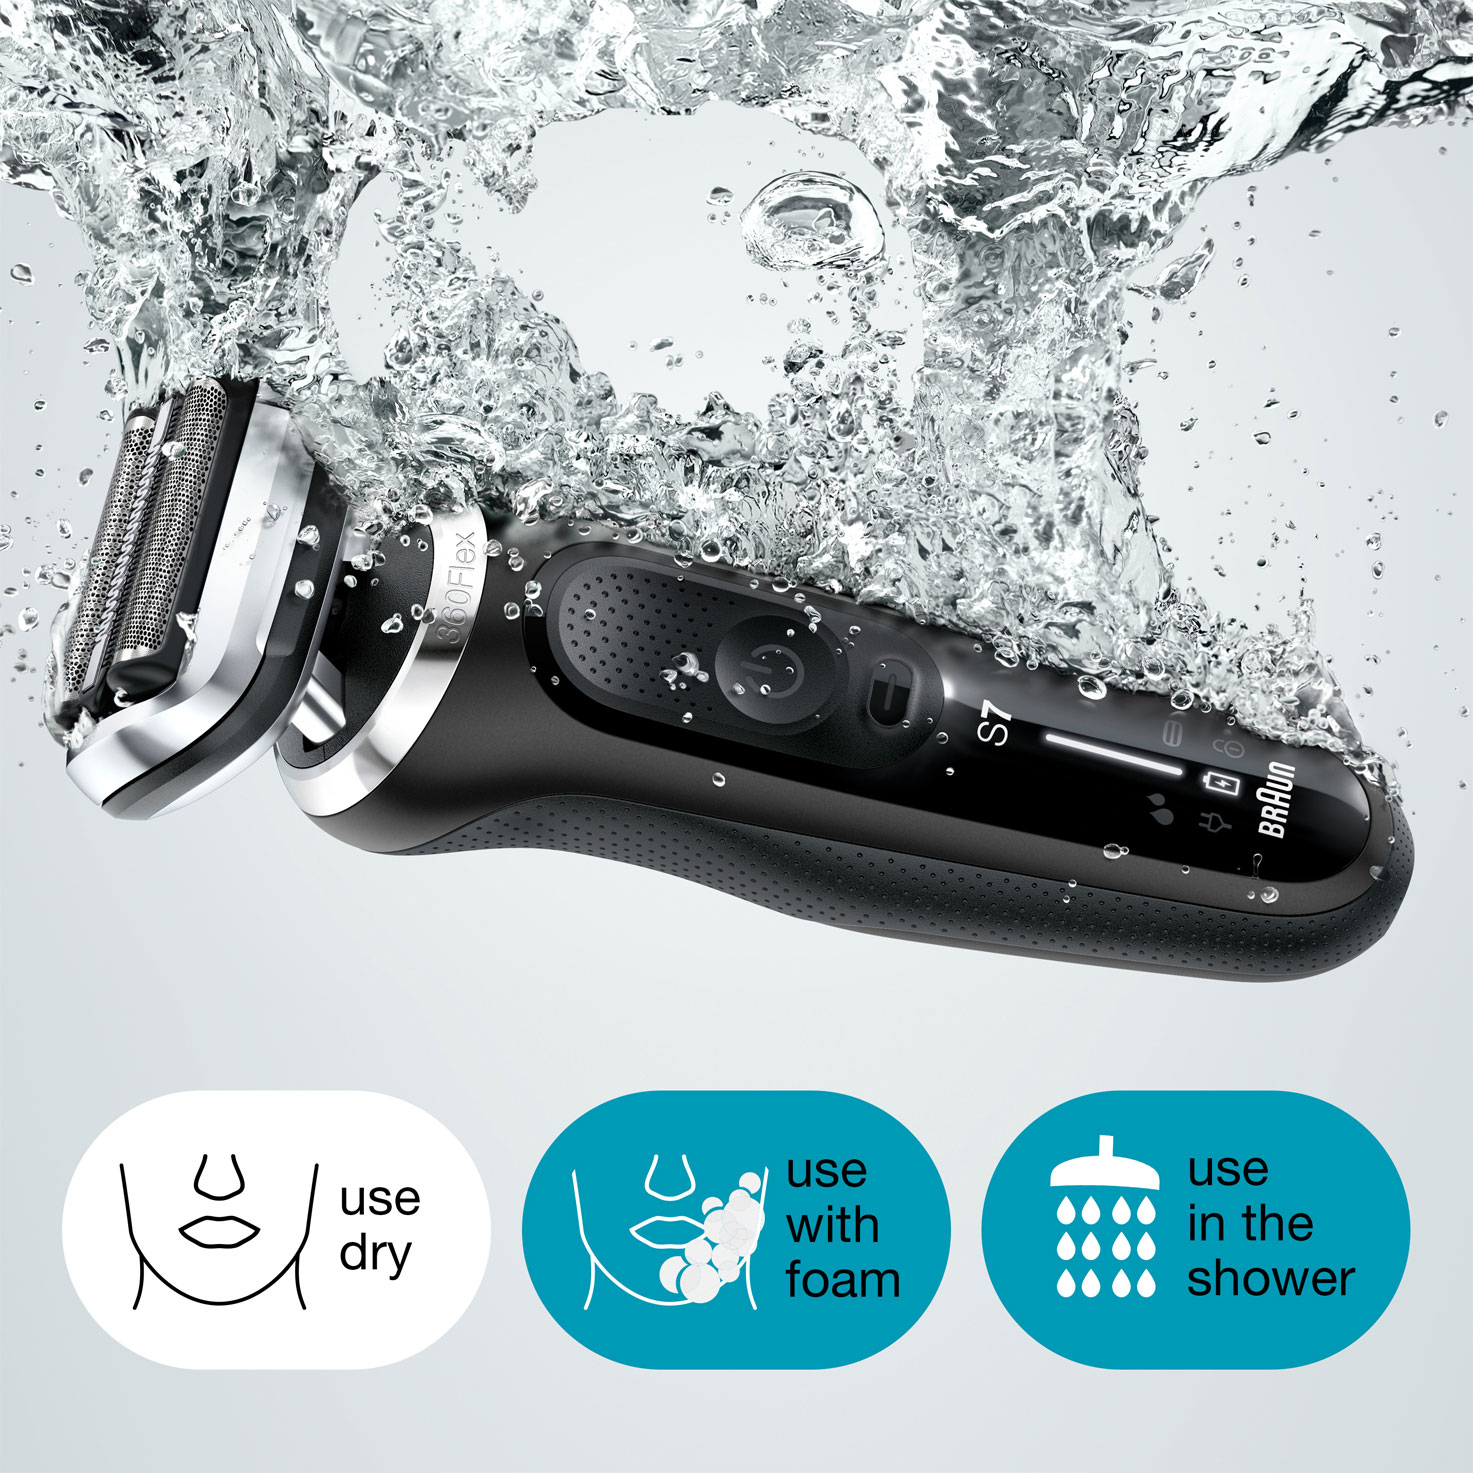 case, Dry 7 Wet 71-N1000s Series travel with shaver &